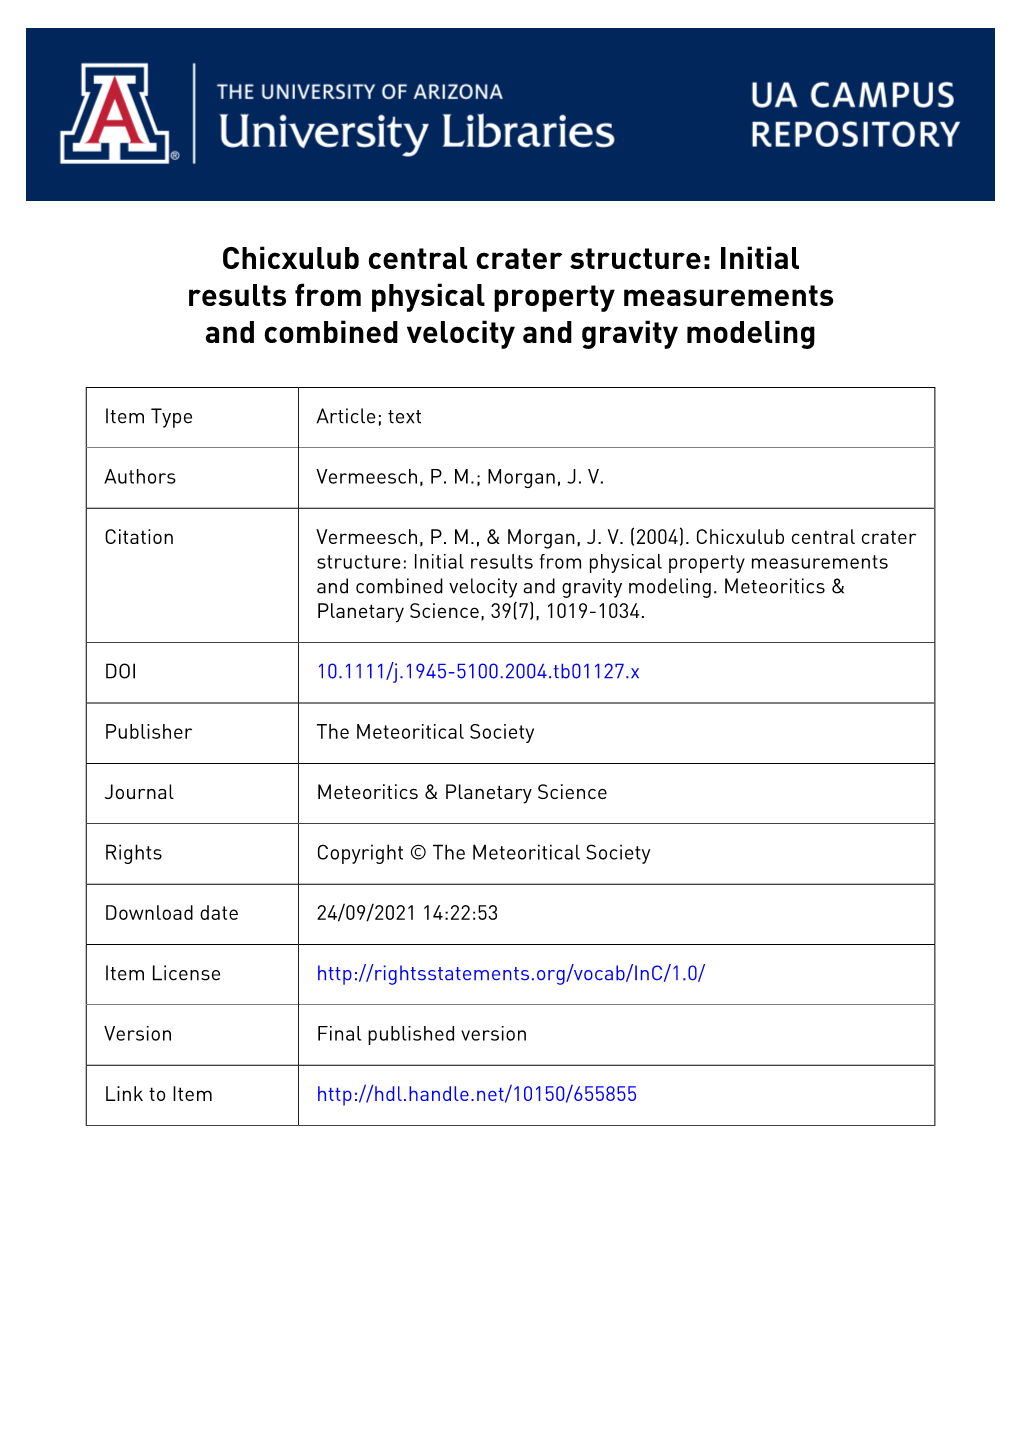 Chicxulub Central Crater Structure: Initial Results from Physical Property Measurements and Combined Velocity and Gravity Modeling